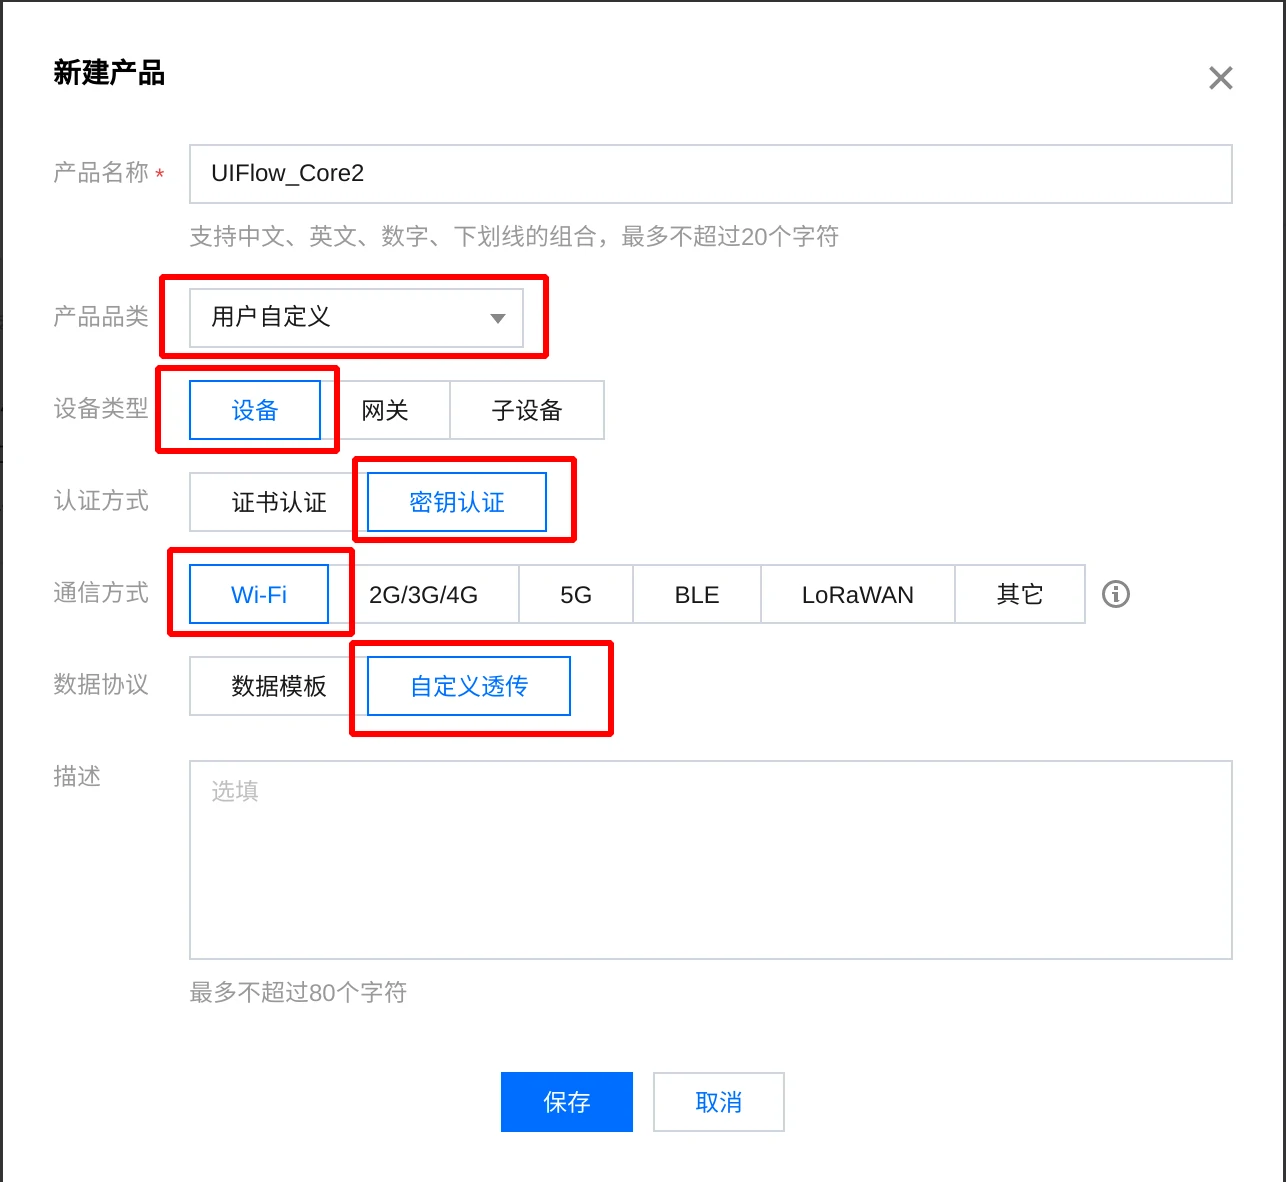 Fill in the basic product information to create a new product in the Tencent Cloud IoT platform.